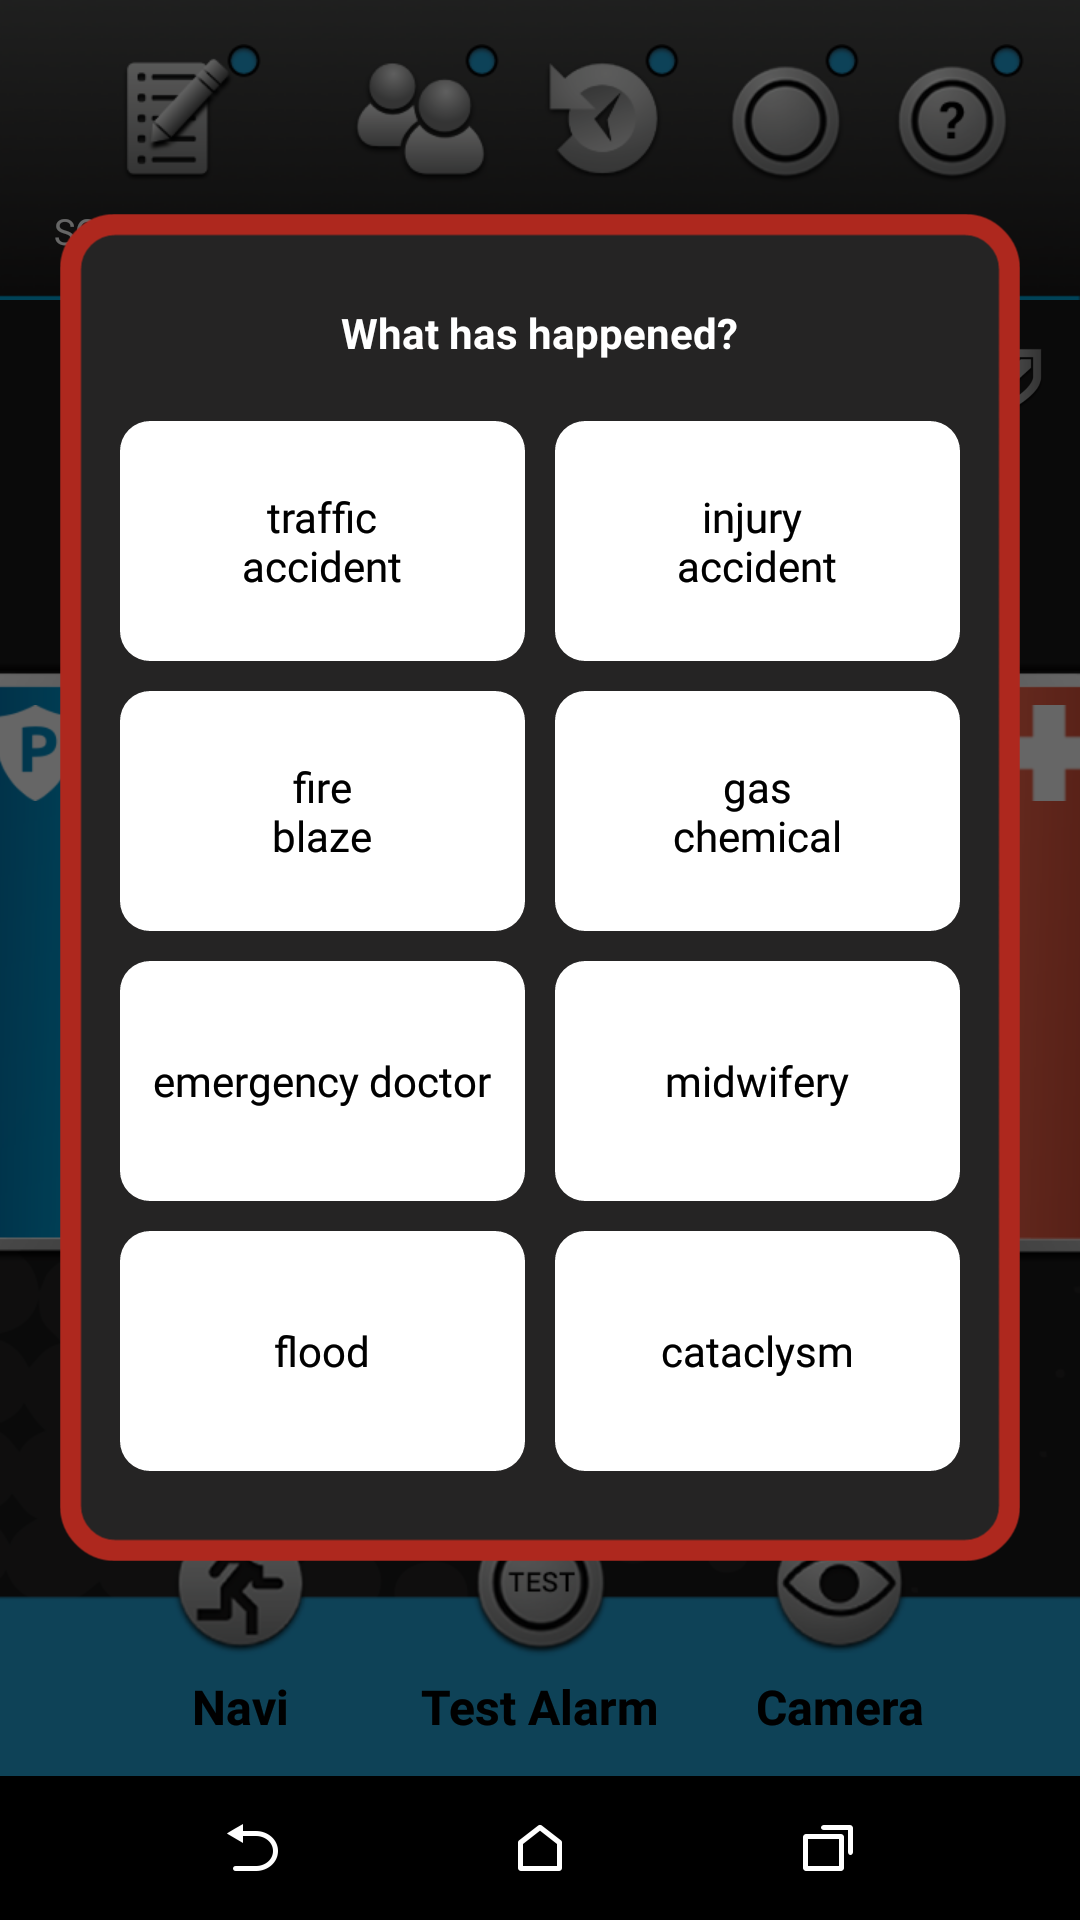 Android application Emergency HandHelp - Life Care screenshort